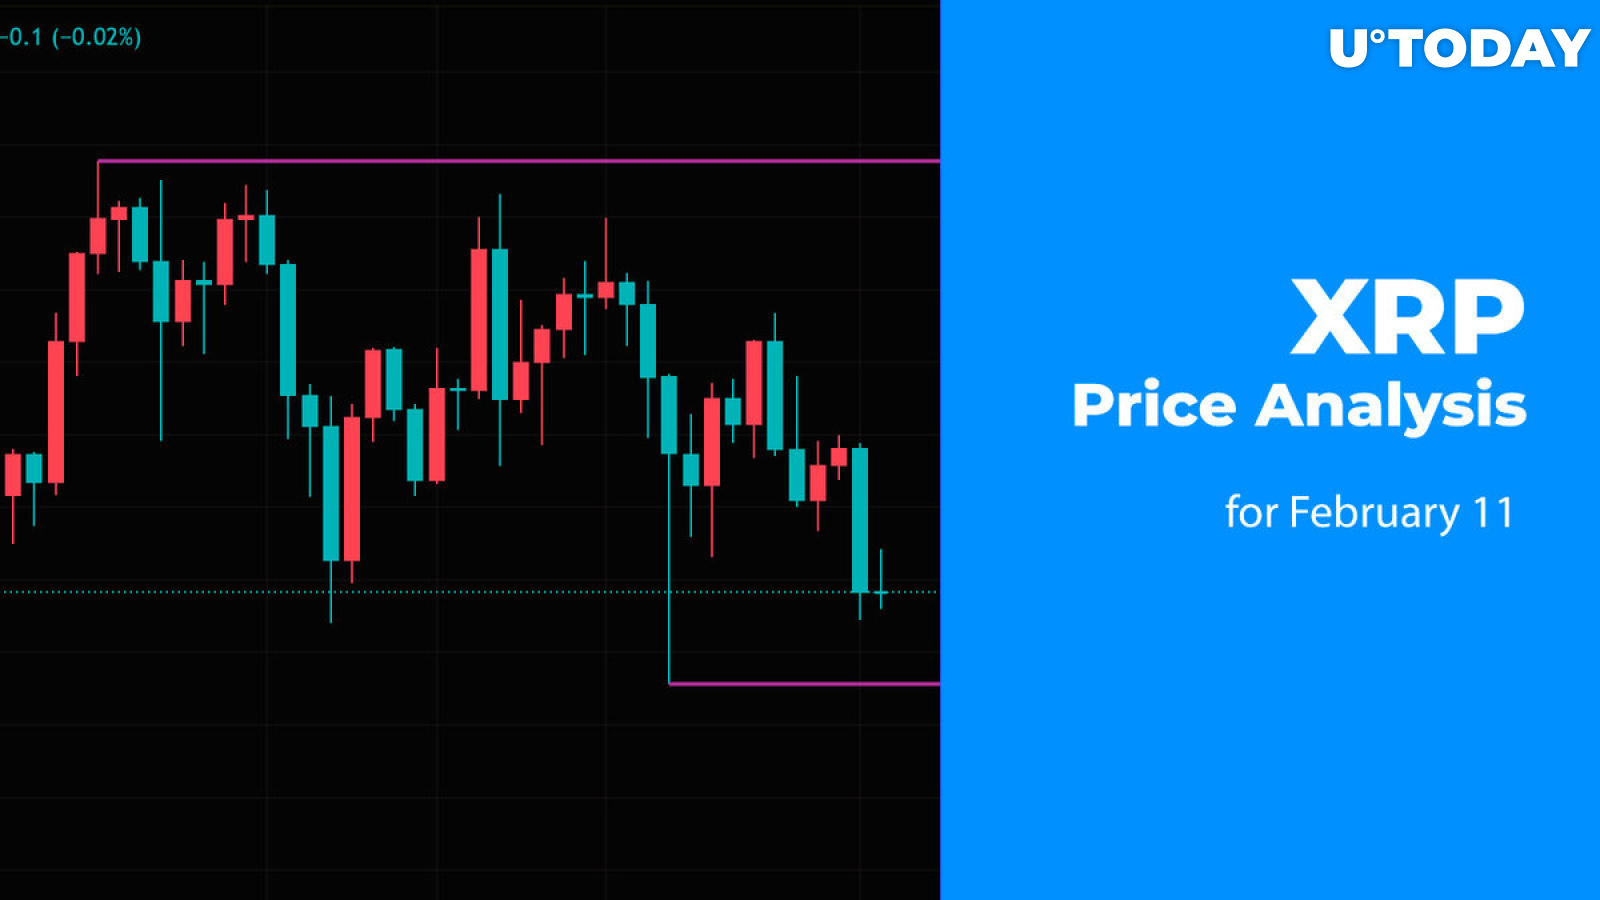 XRP Price Analysis for February 11